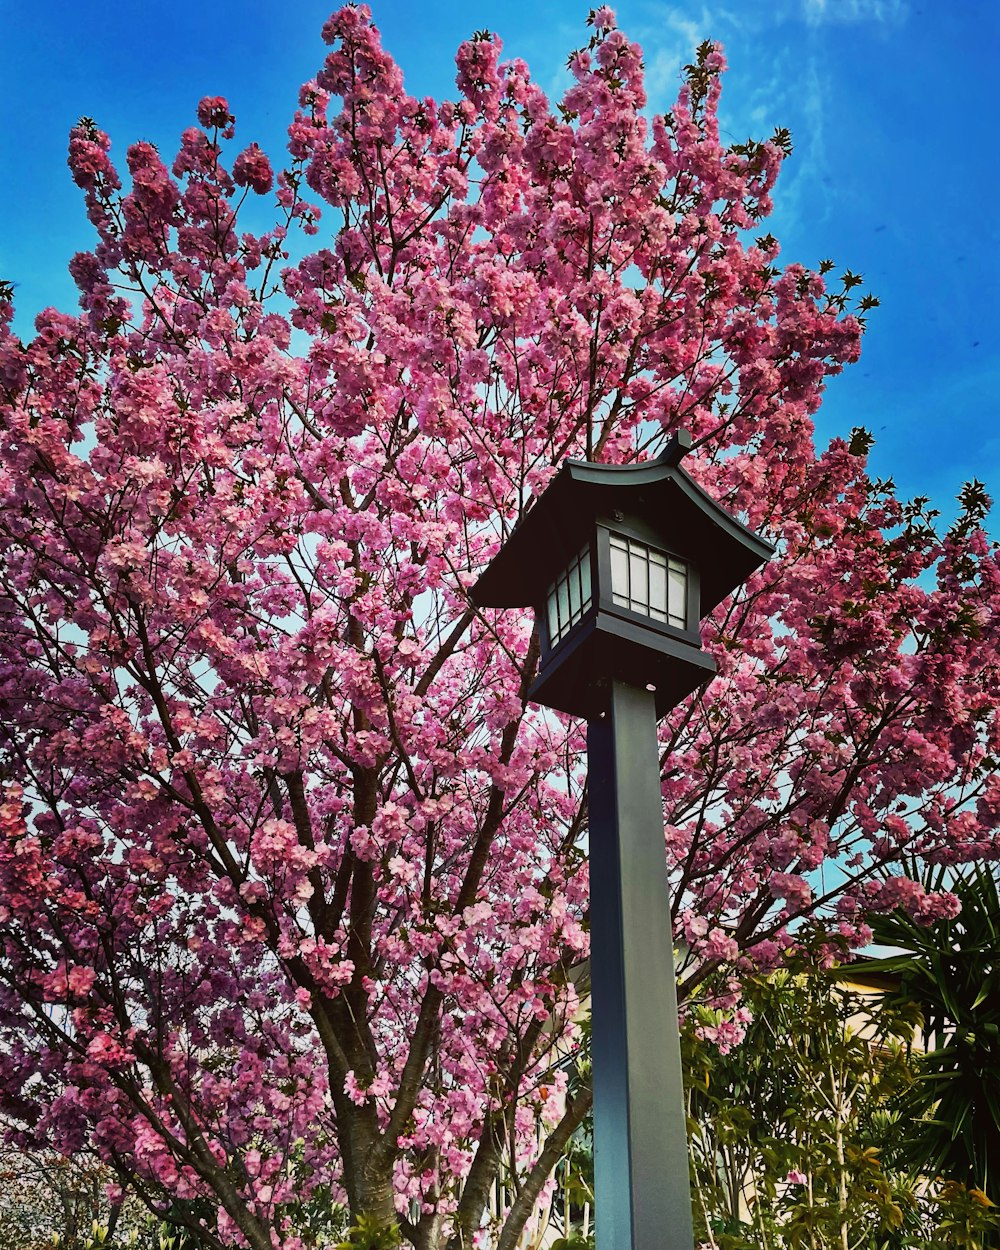 a lamp post with pink flowers on it